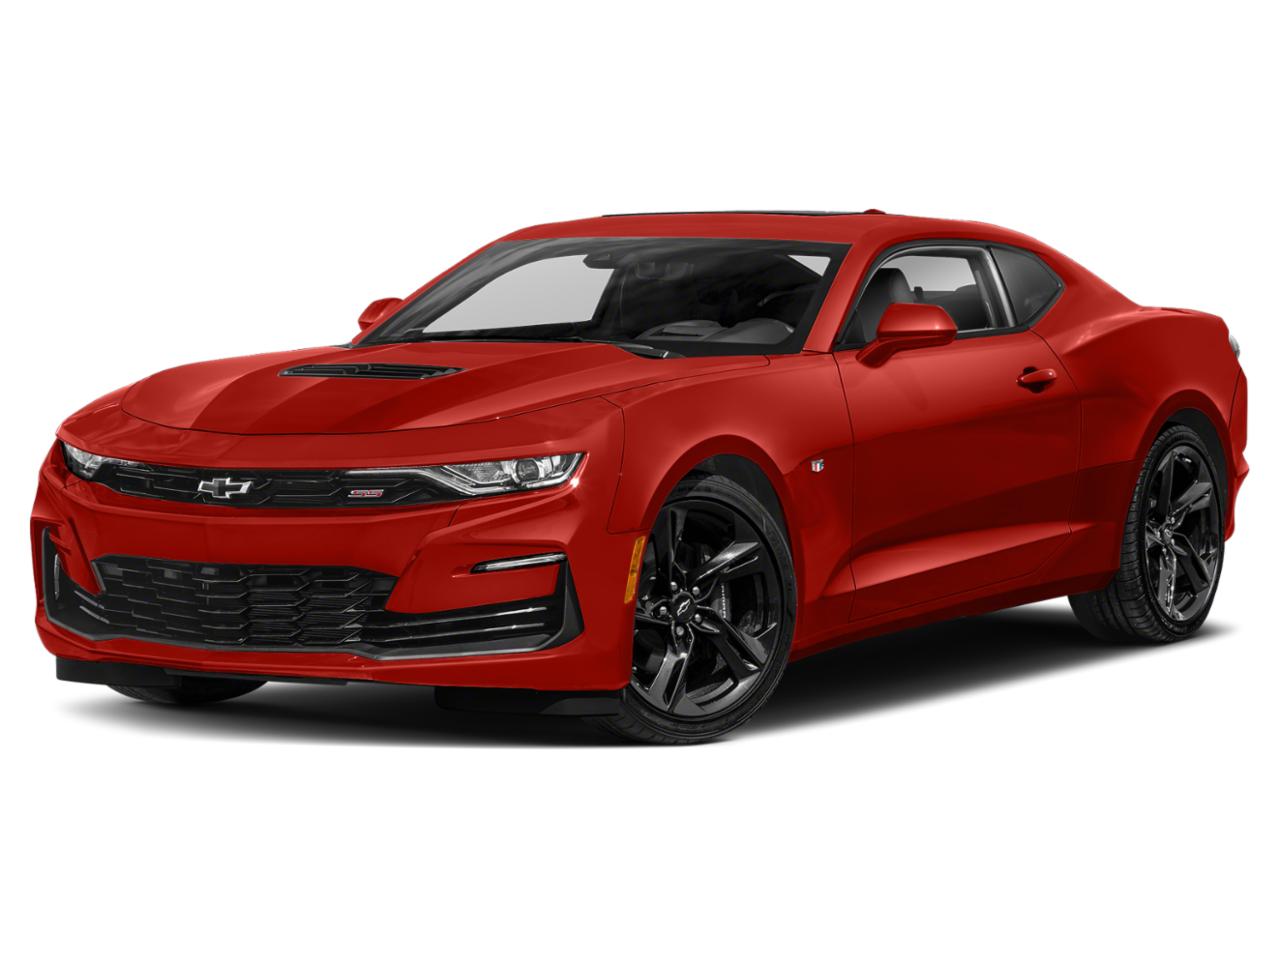 New 2021 Chevrolet Camaro 2dr Coupe 2SS in Red Hot for sale in ...